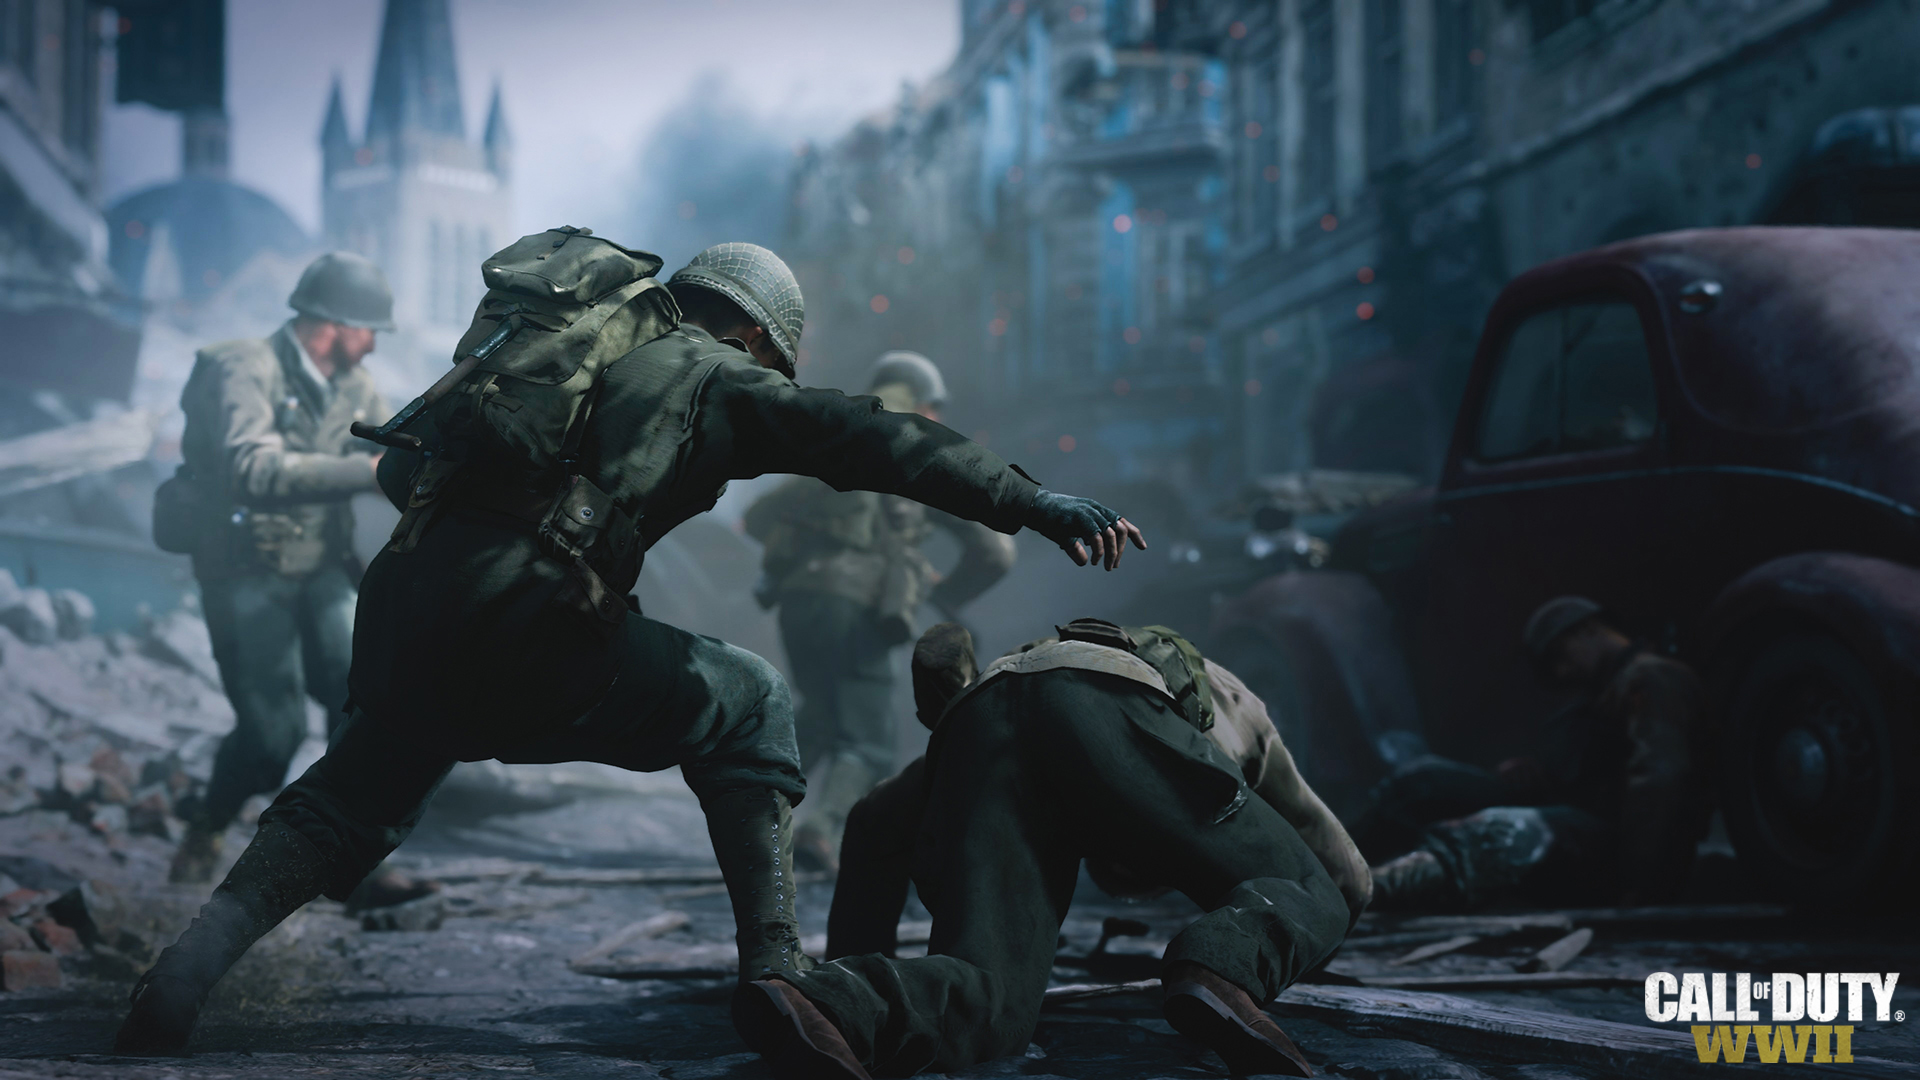 conoce-documental-oficial-call-of-duty-wwii-brotherhood-of-heroes-frikigamers.com